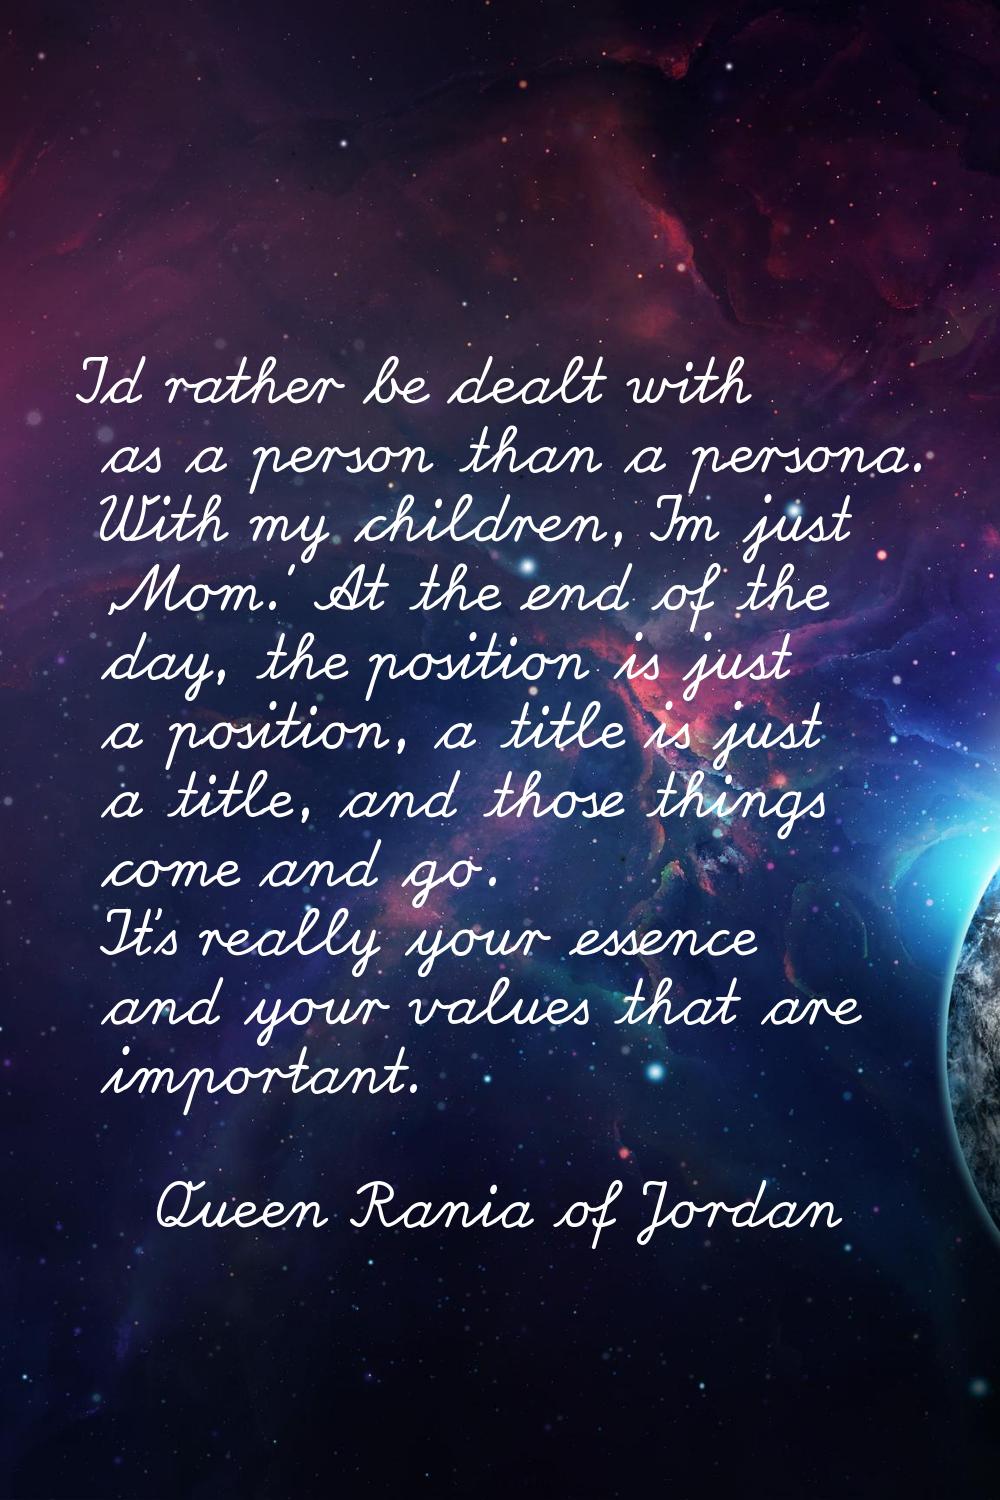 I'd rather be dealt with as a person than a persona. With my children, I'm just 'Mom.' At the end o